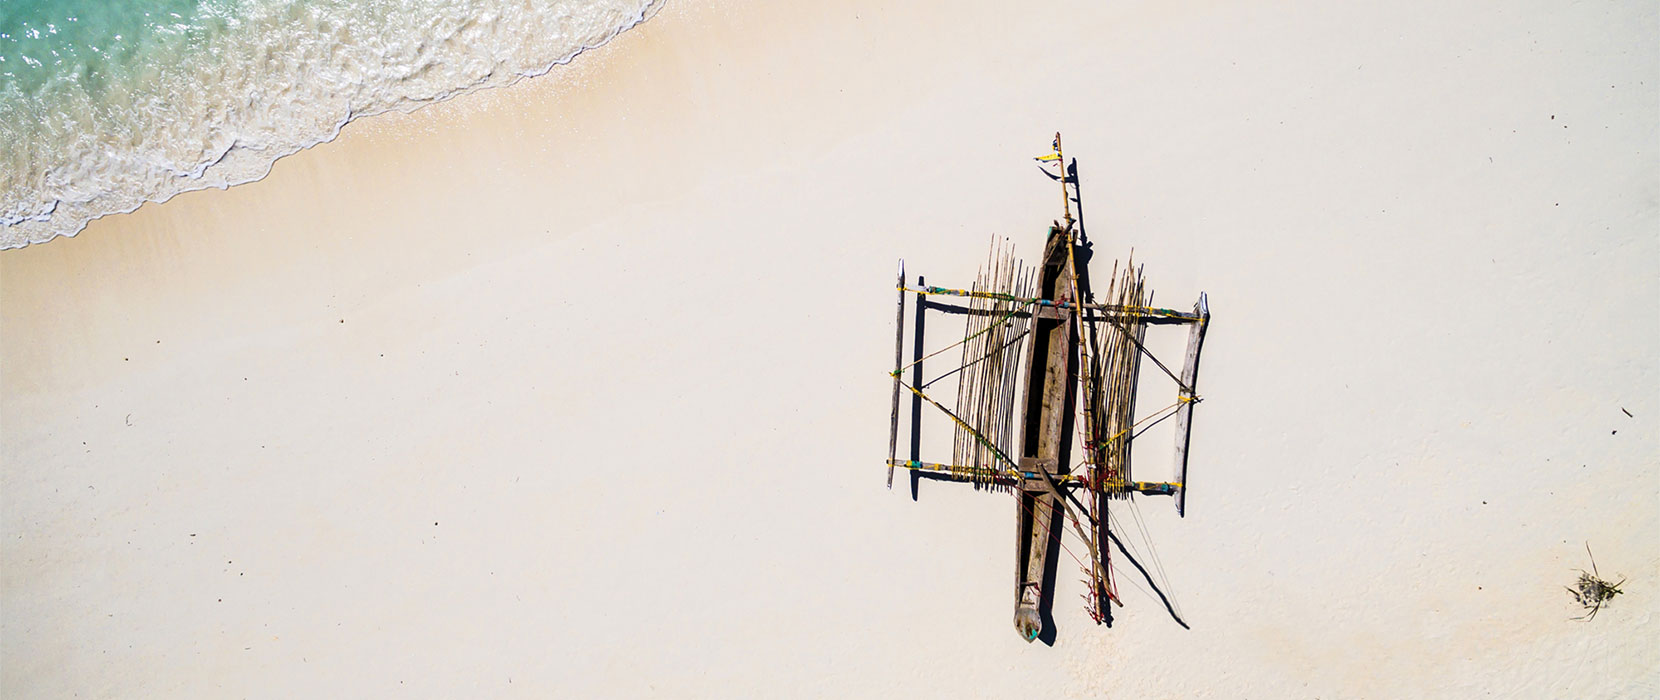 Aerial image of outrigger canoe on a sandy beach with turquois sea.